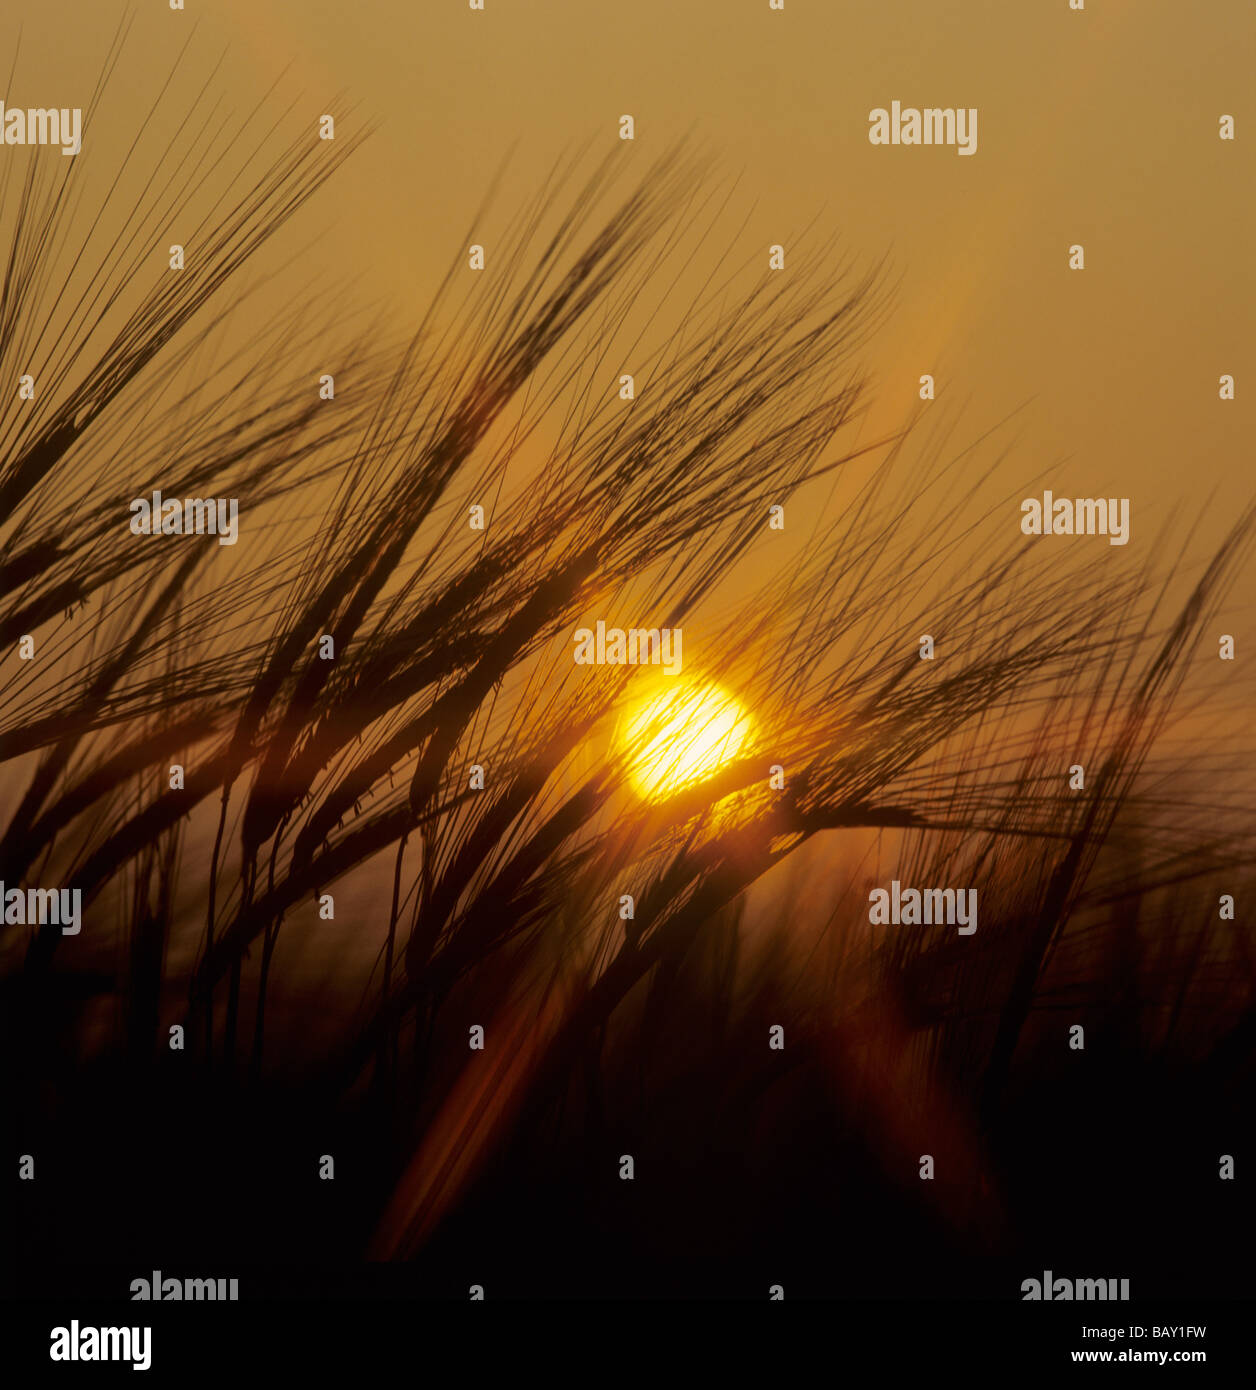 Flowering ears of unripe barley silouetted against a setting sun Stock Photo